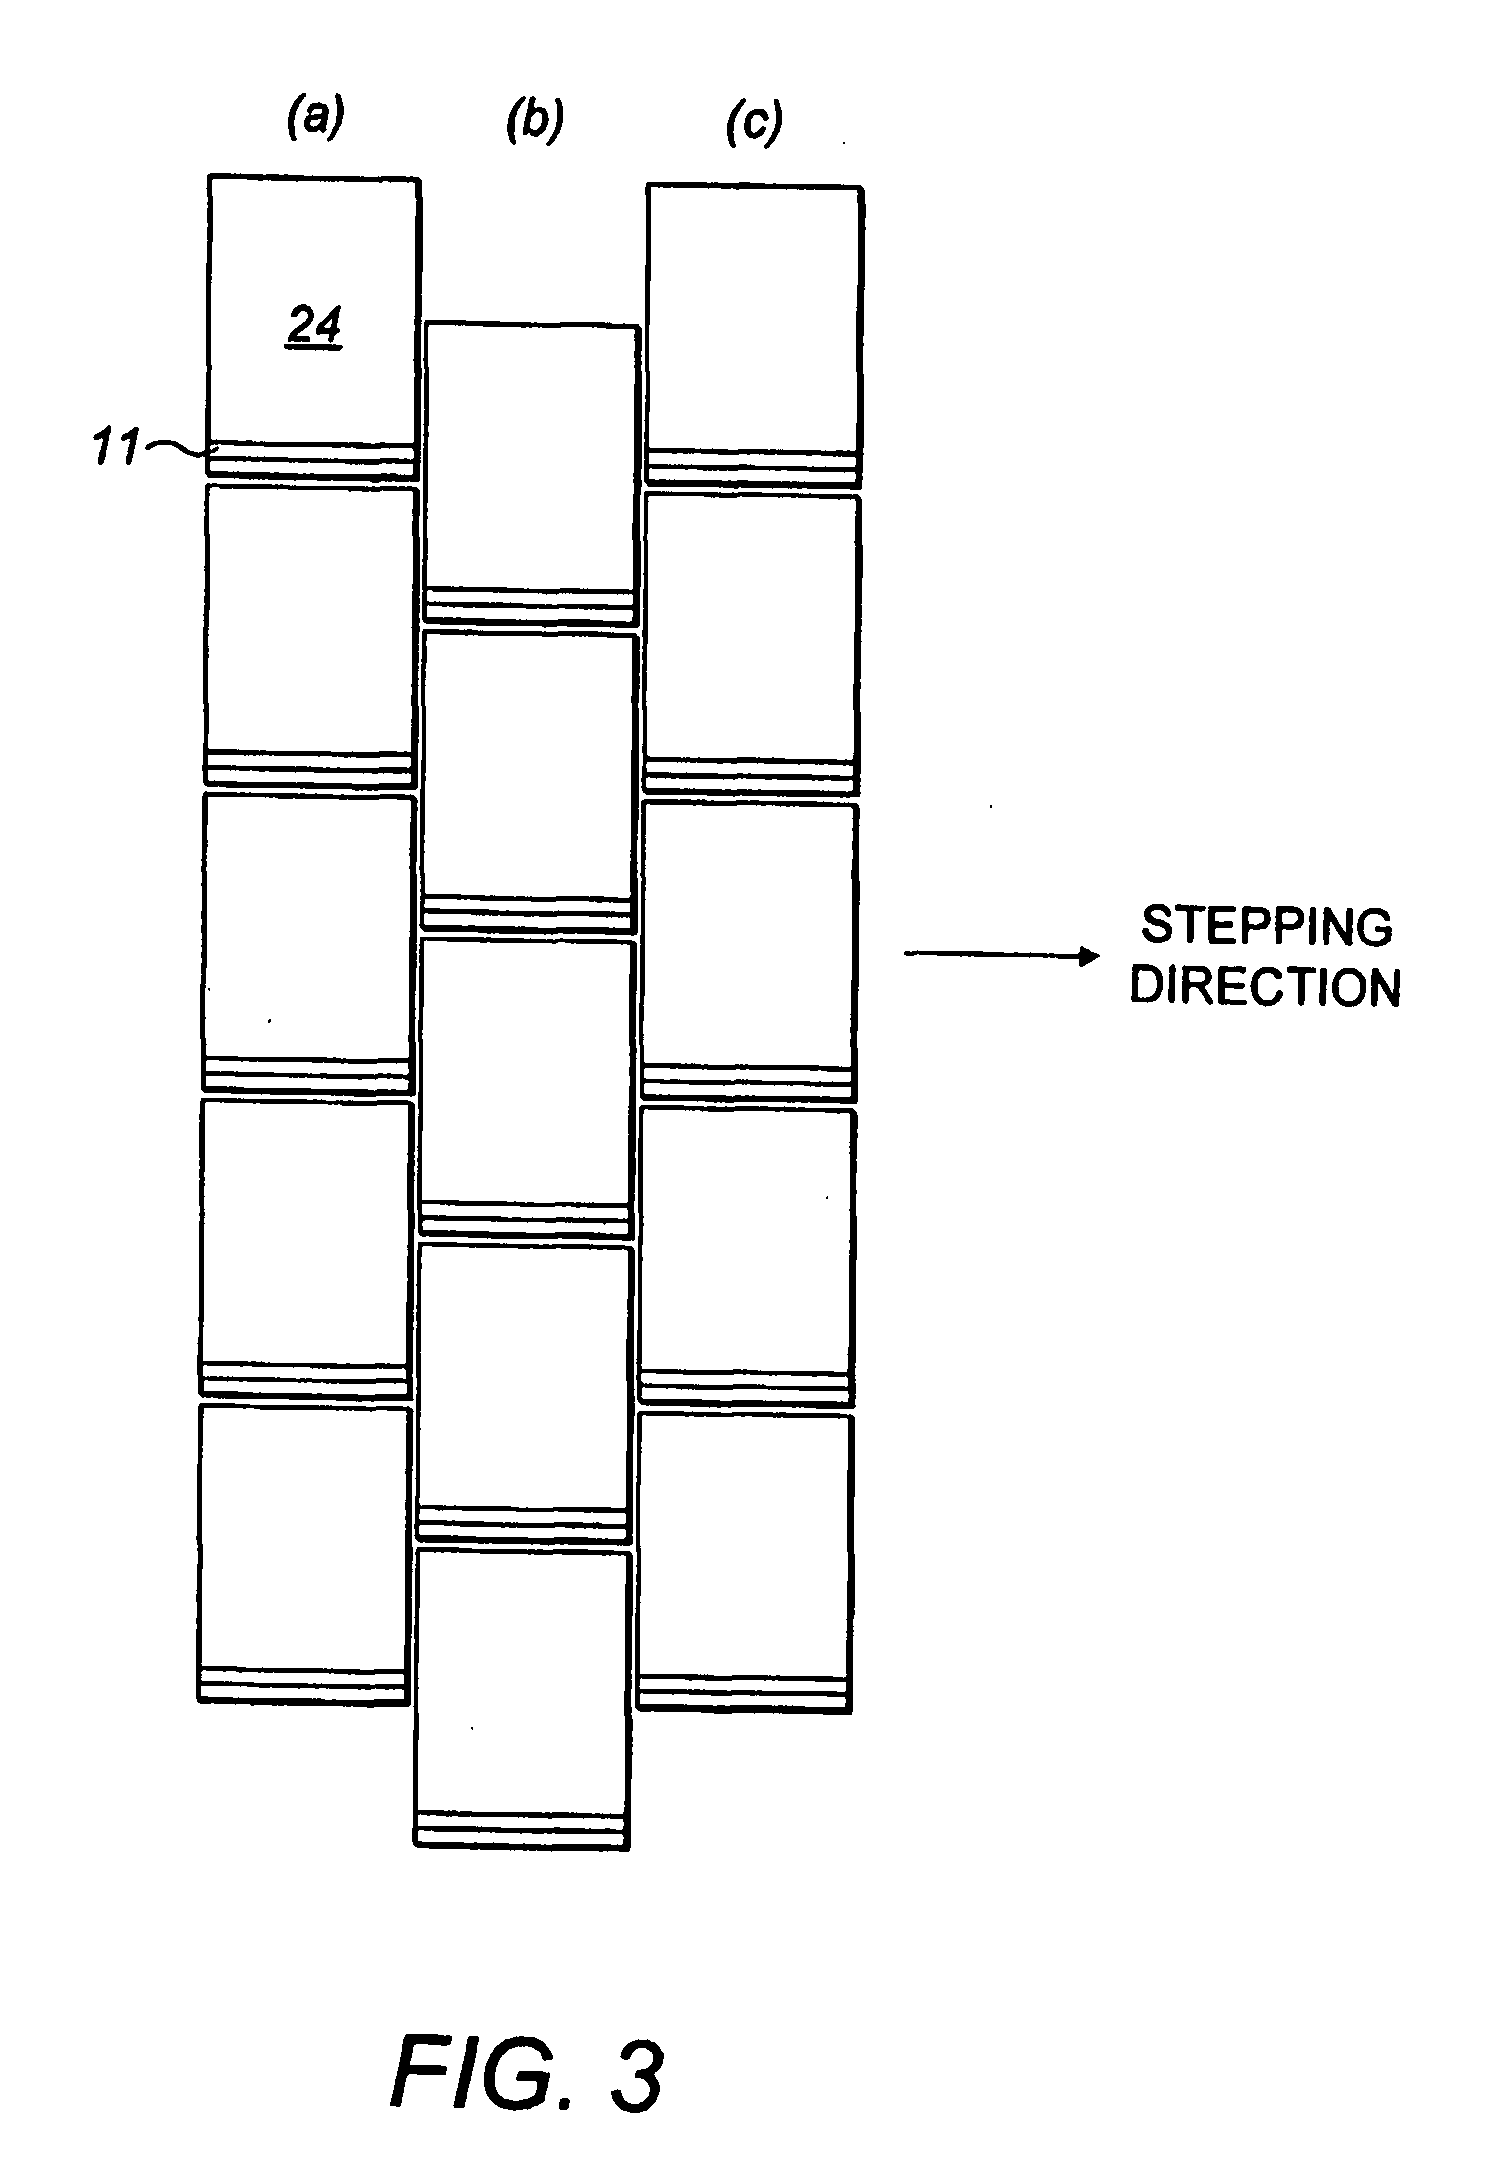 Circuit Substrate and Method